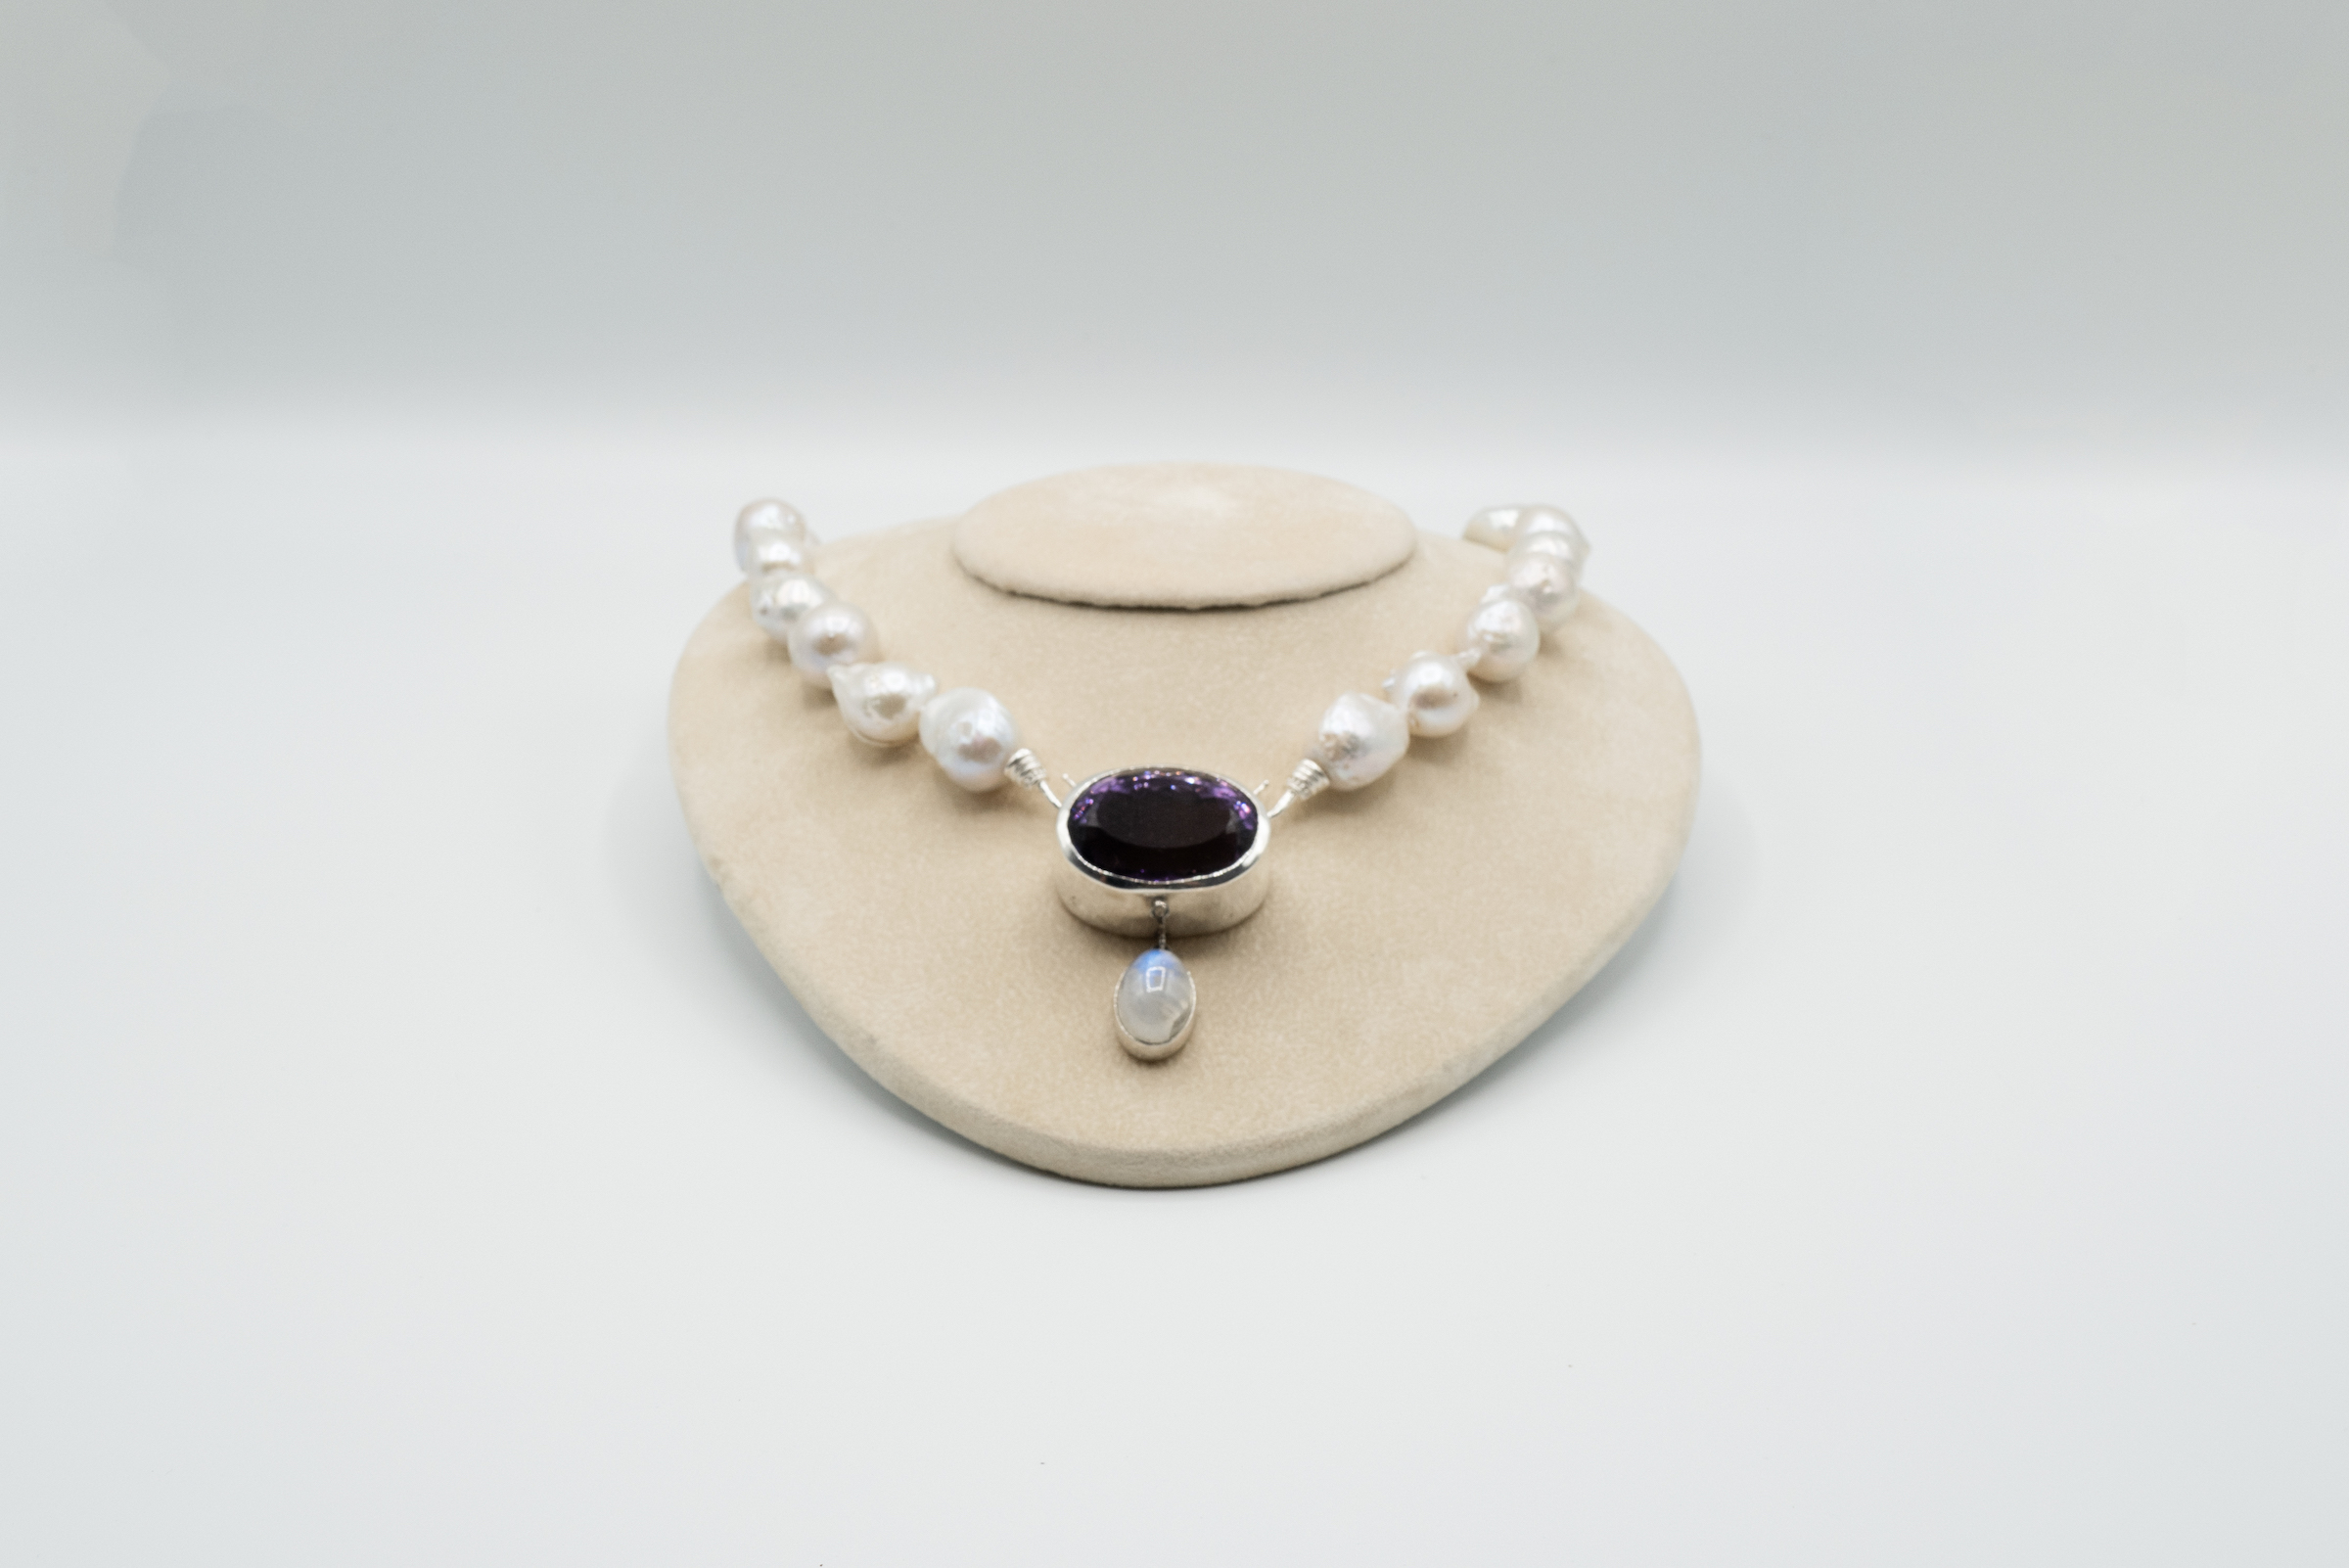 Large Amethyst and Moonstone Centerpiece, with Lacquered Sterling Silver Mounting